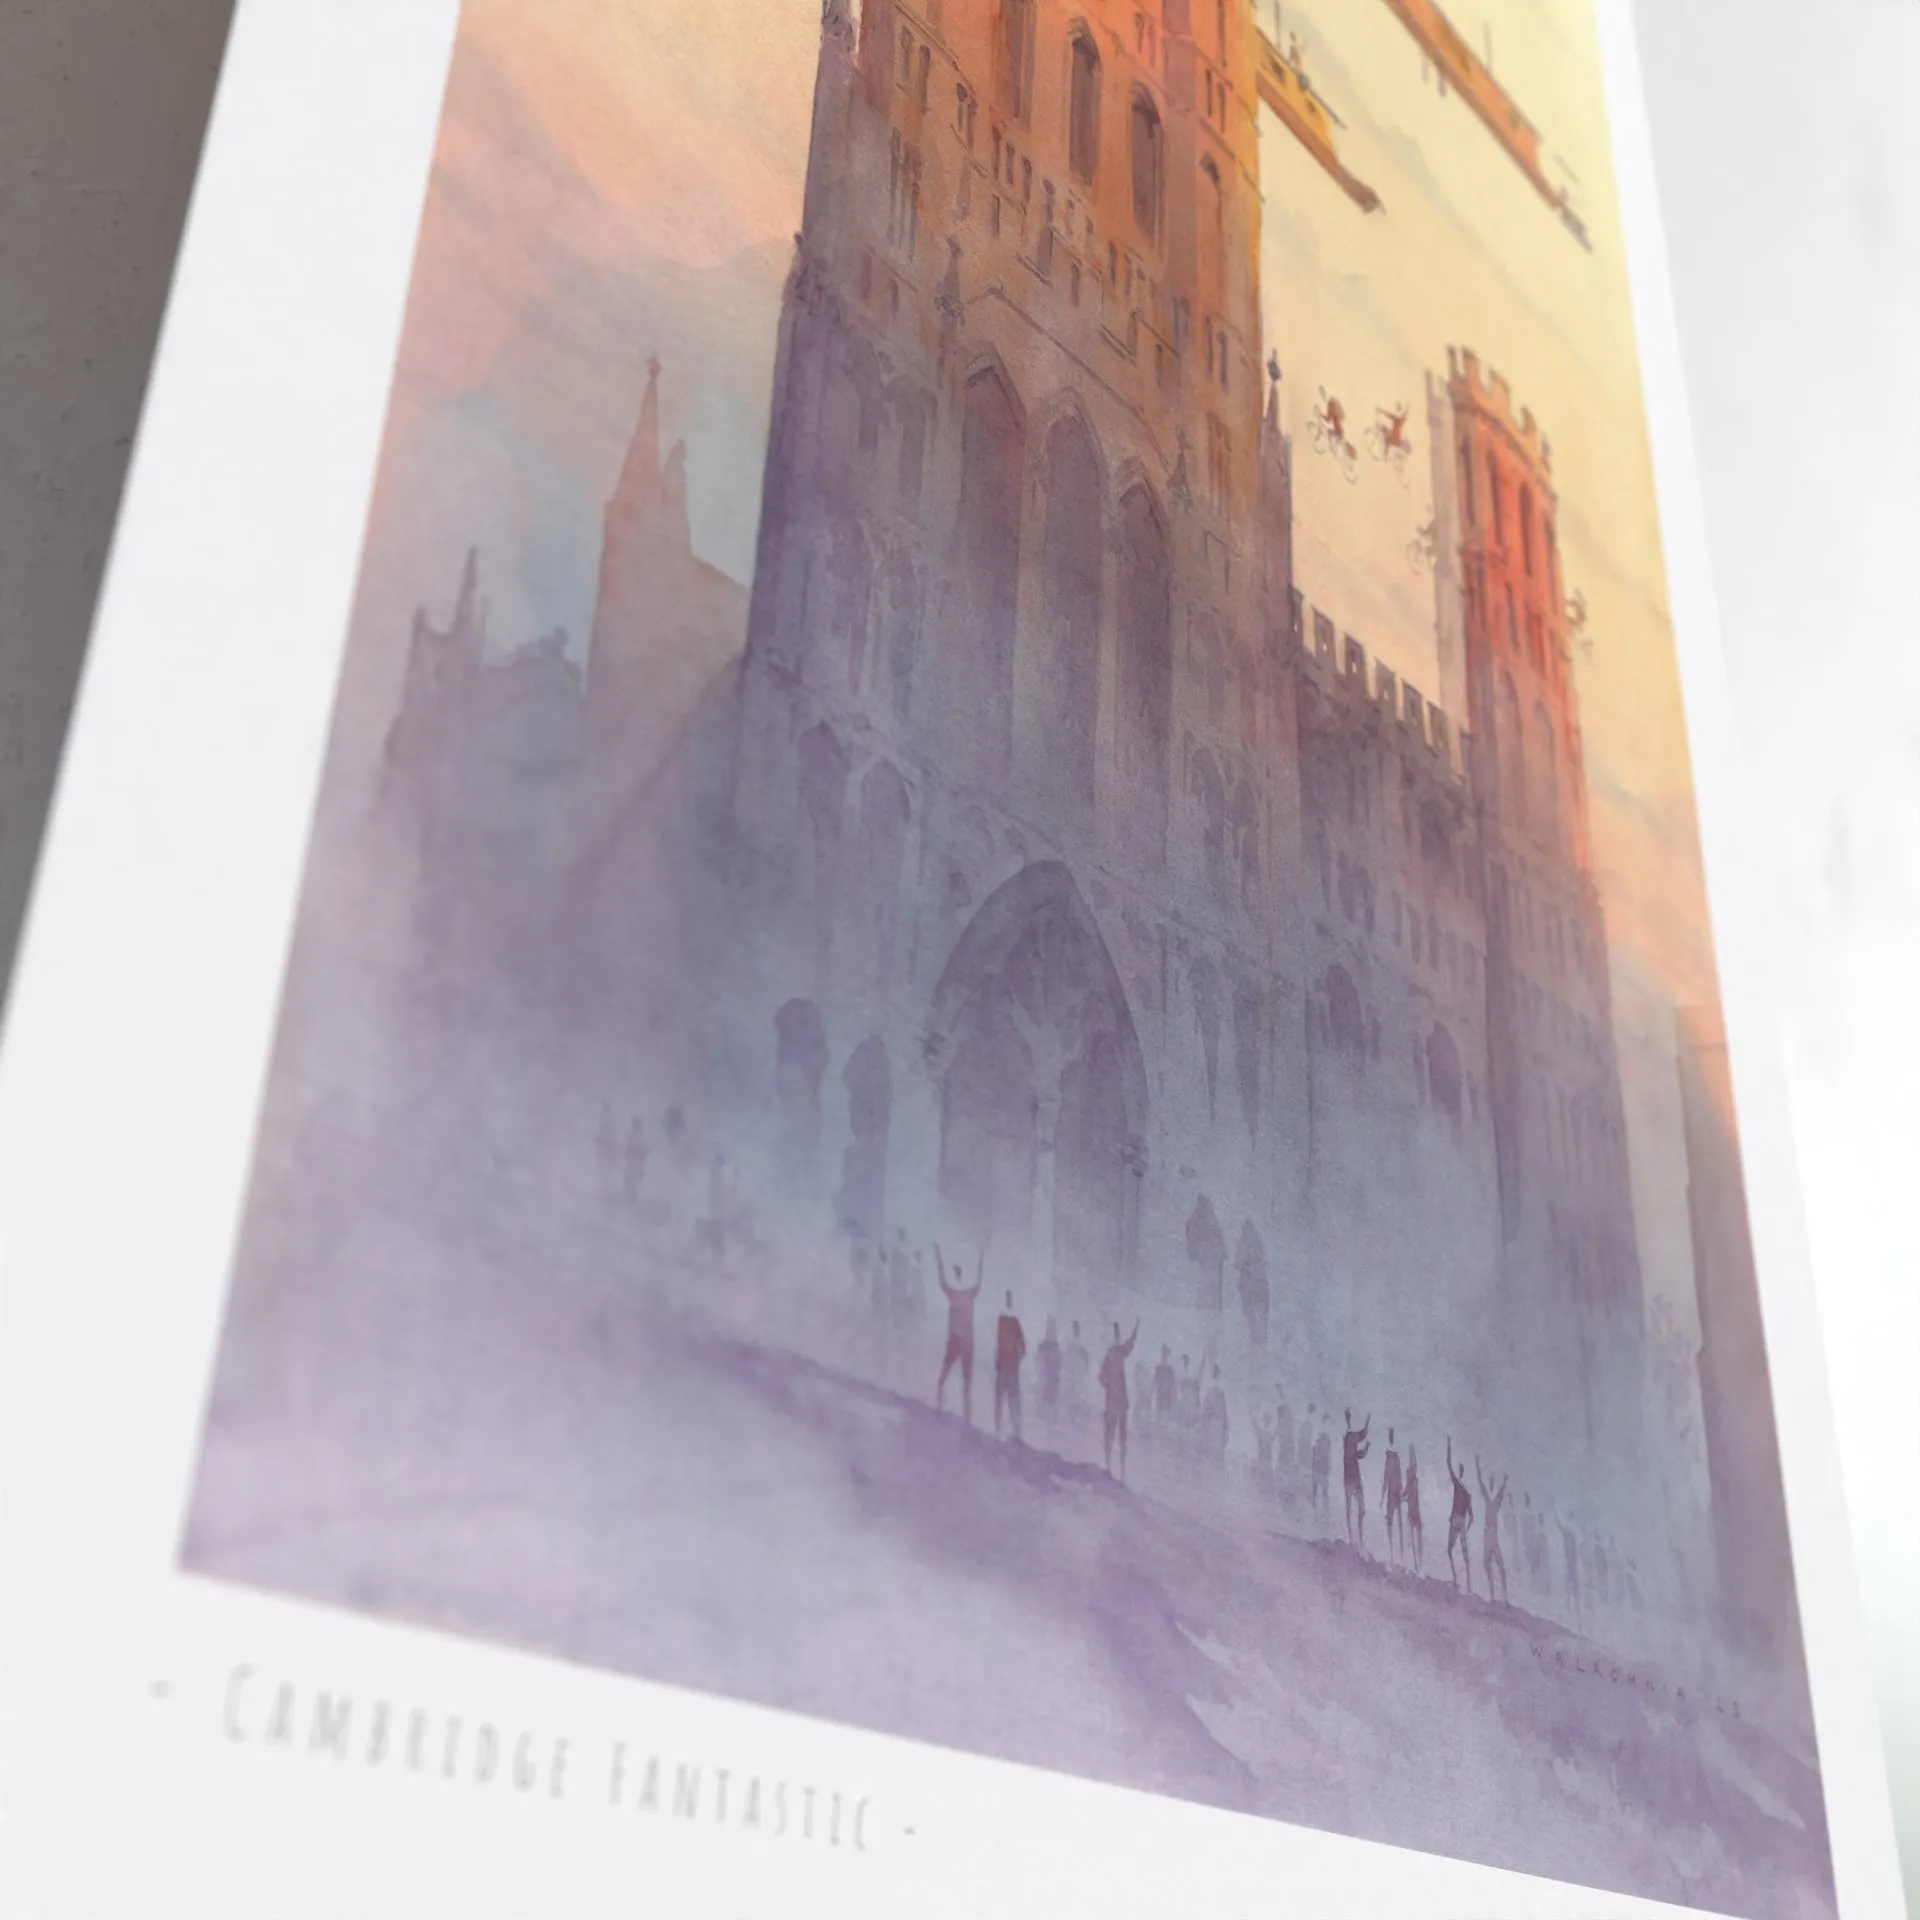 Closeup of Ely Cathedral Limited Print of 200